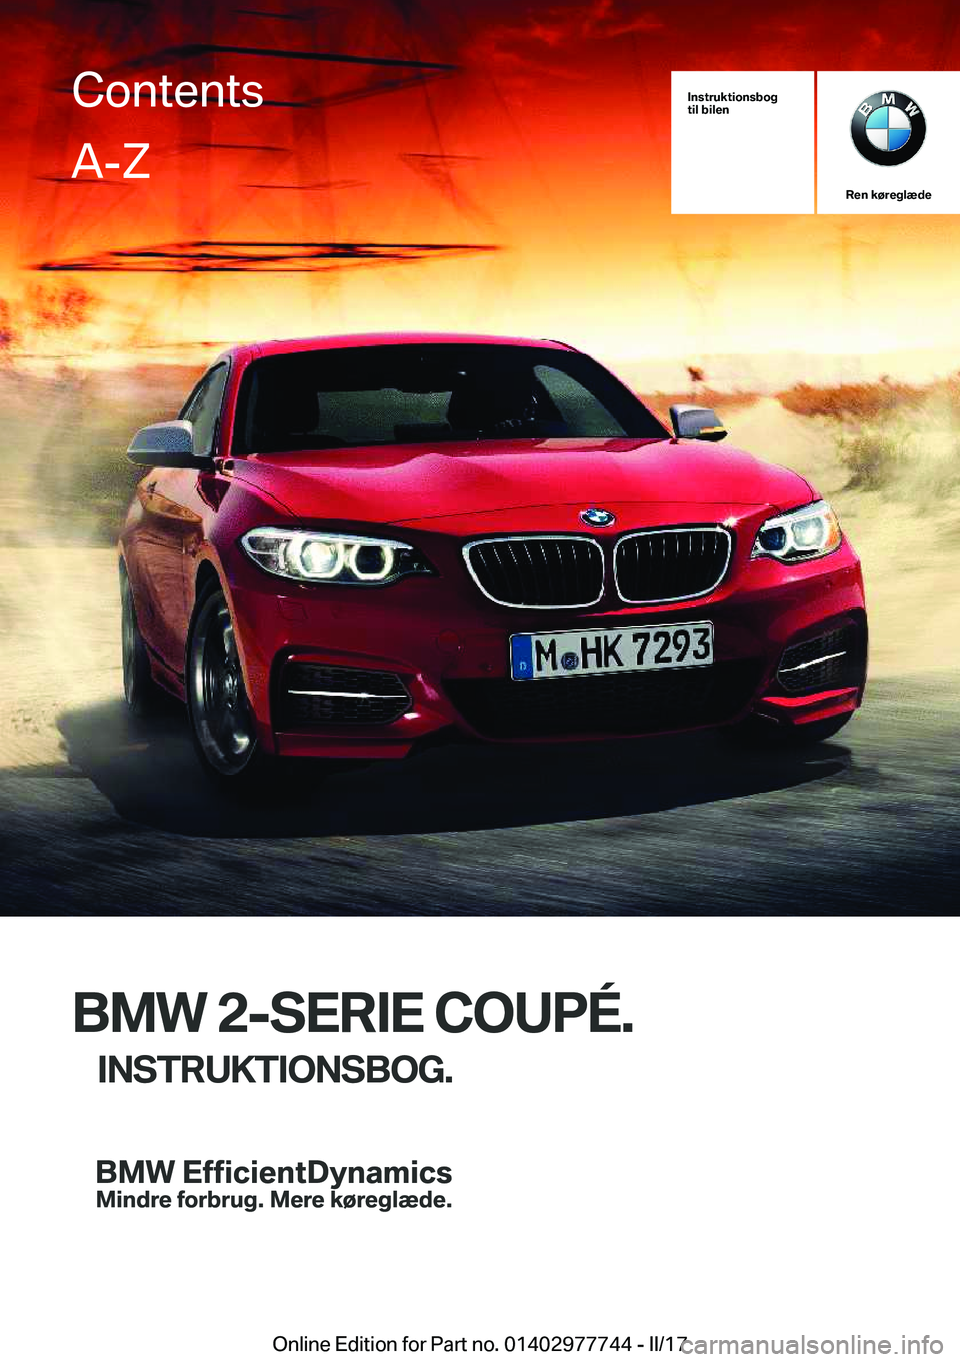 BMW 2 SERIES COUPE 2017  InstruktionsbØger (in Danish) �I�n�s�t�r�u�k�t�i�o�n�s�b�o�g
�t�i�l��b�i�l�e�n
�R�e�n��k�